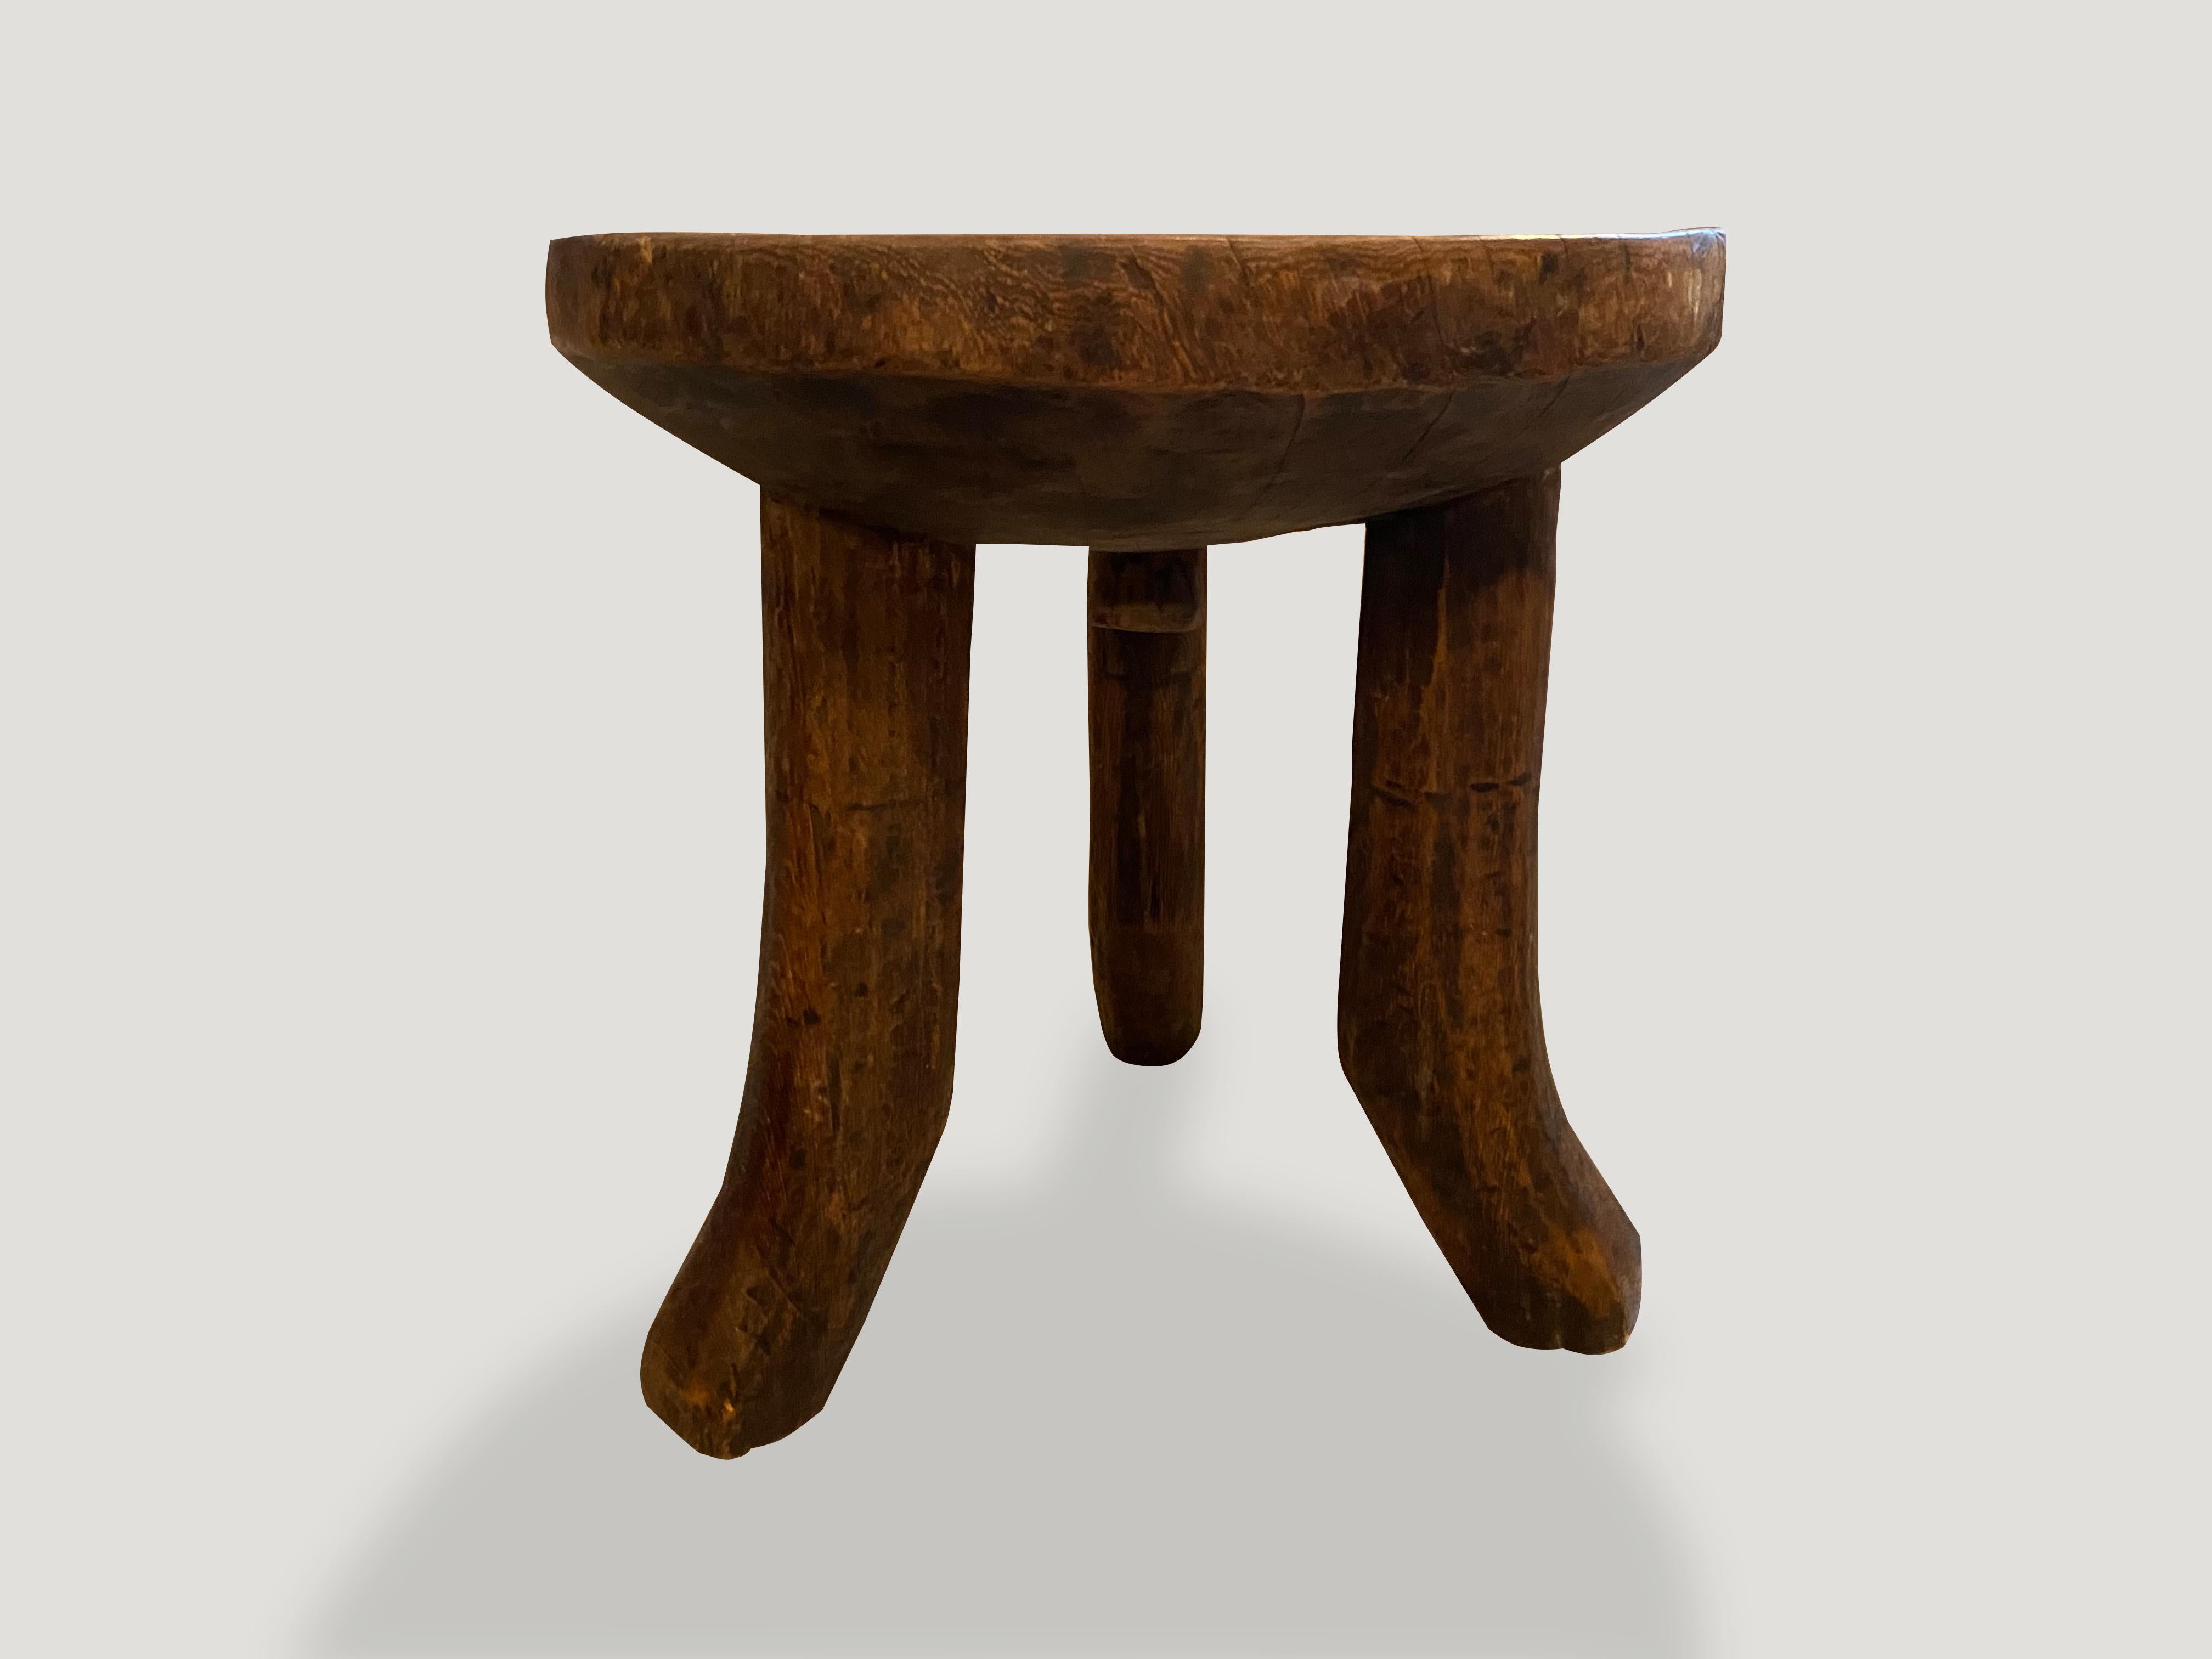 20th Century Andrianna Shamaris Antique African Mahogany Wood Sculptural Side Table or Bowl